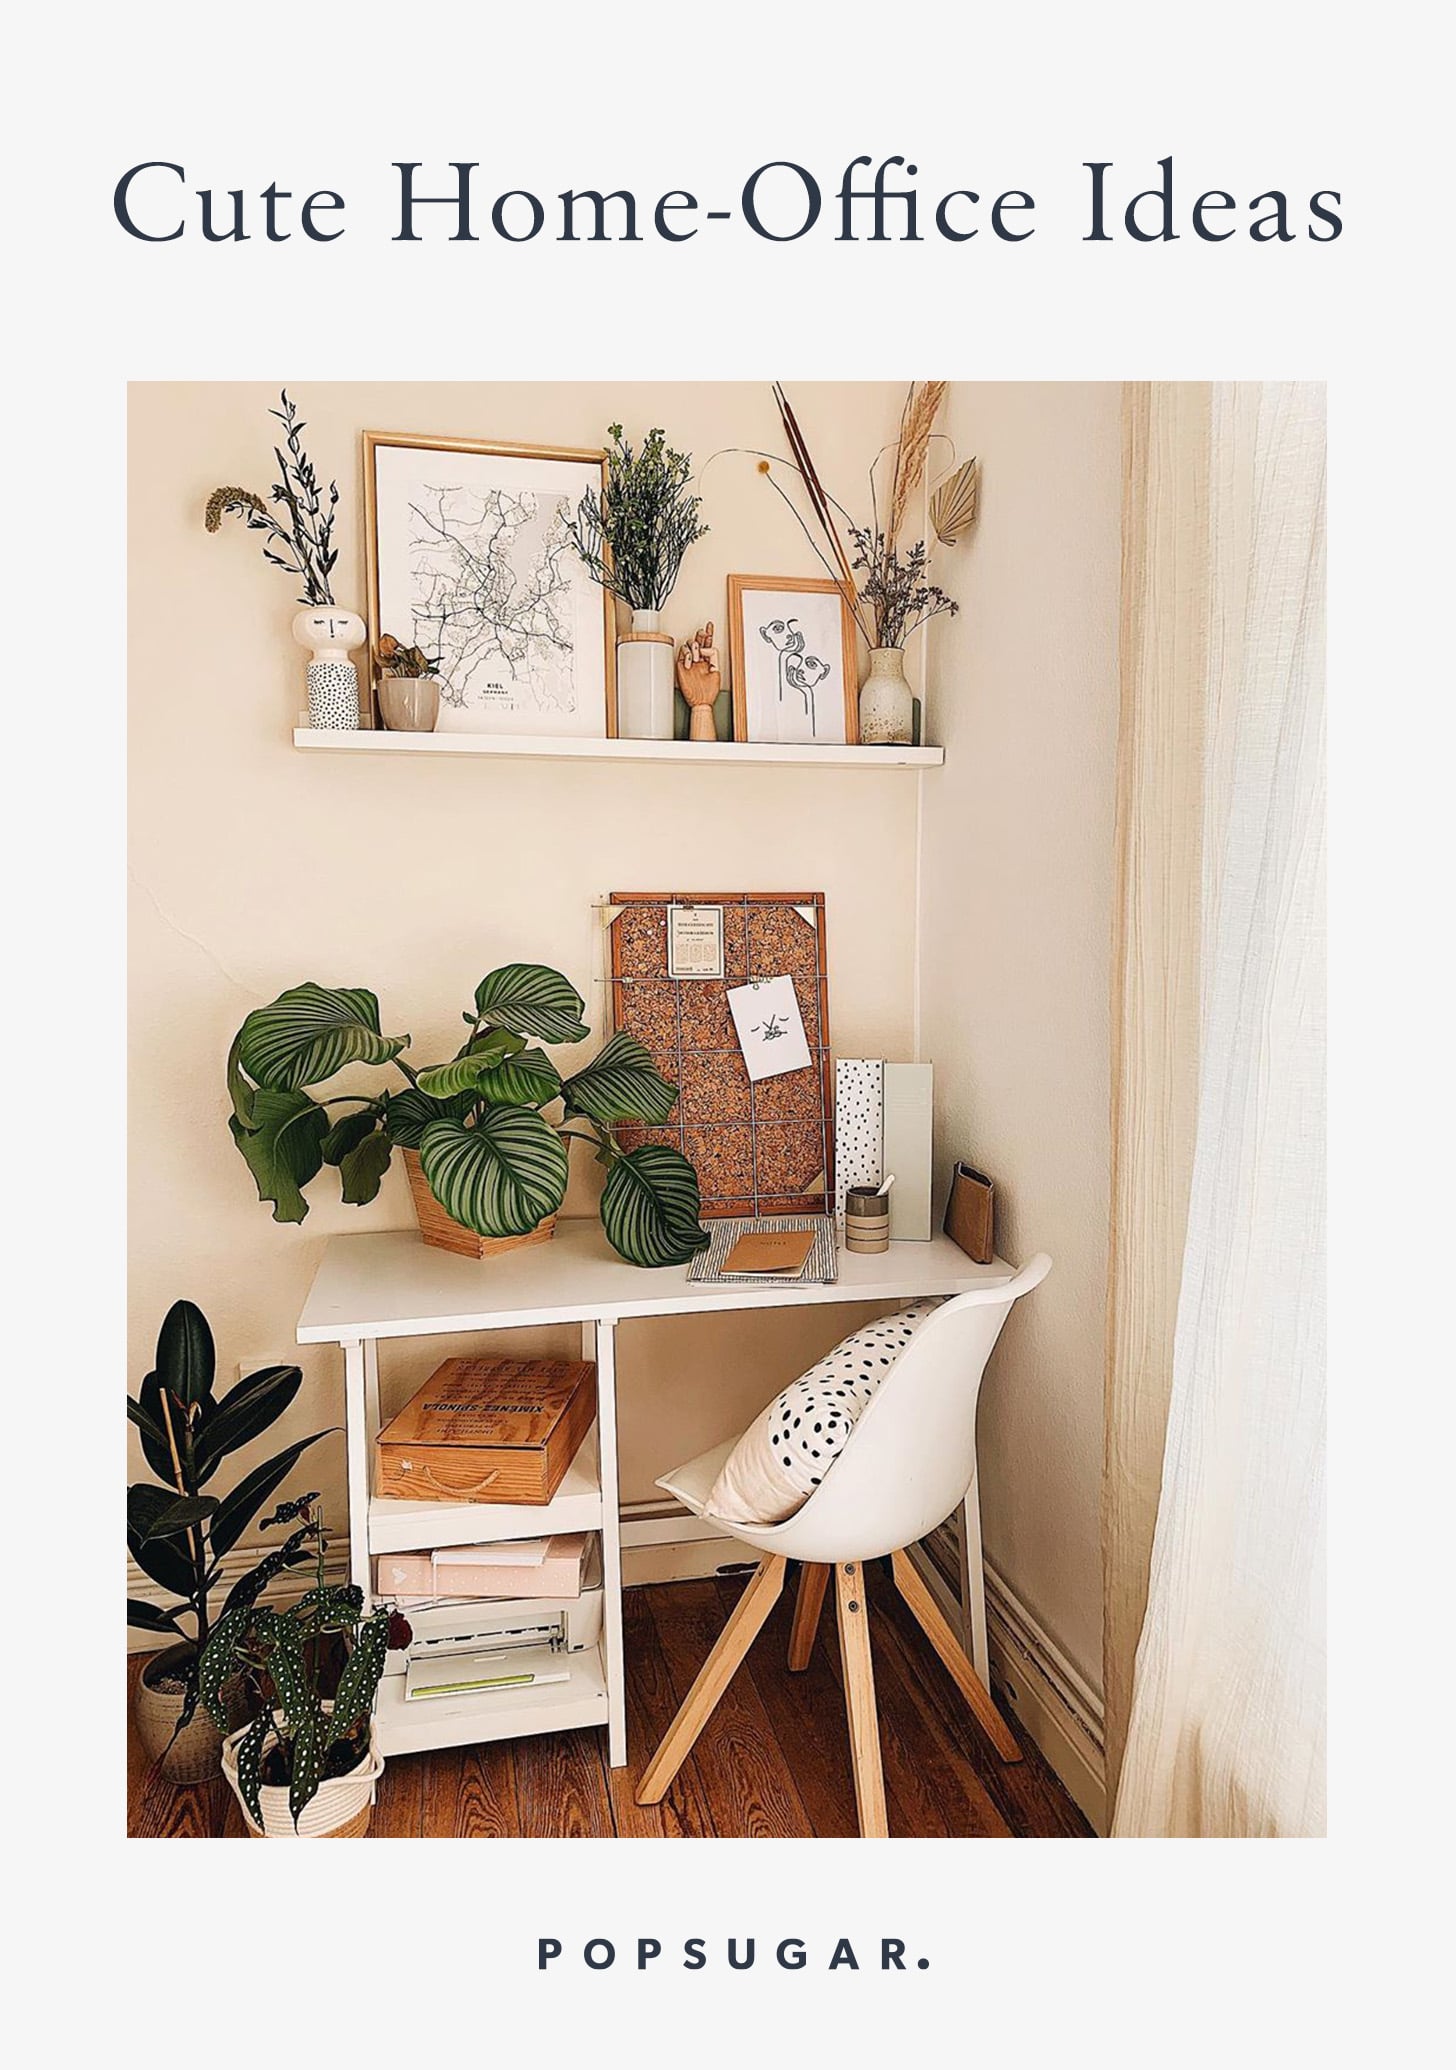 20 Cute Home Offices You'll Want to Re-Create | POPSUGAR Home